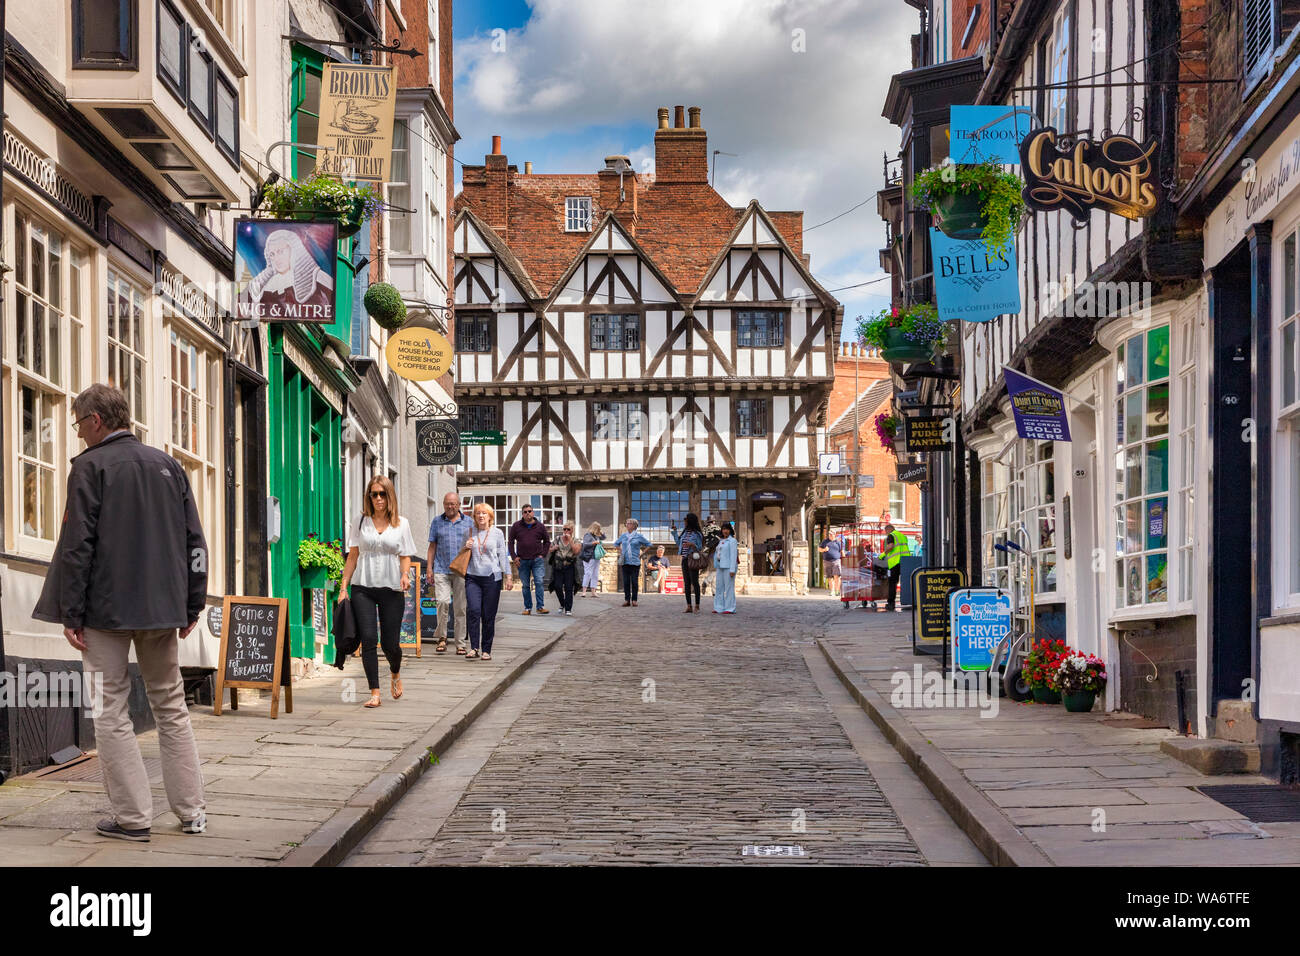 2 July 2019: Lincoln, UK - Tourists sightseeing in Steep Hill, the city's famous medieval street. The half timbered, black and white building at the t Stock Photo